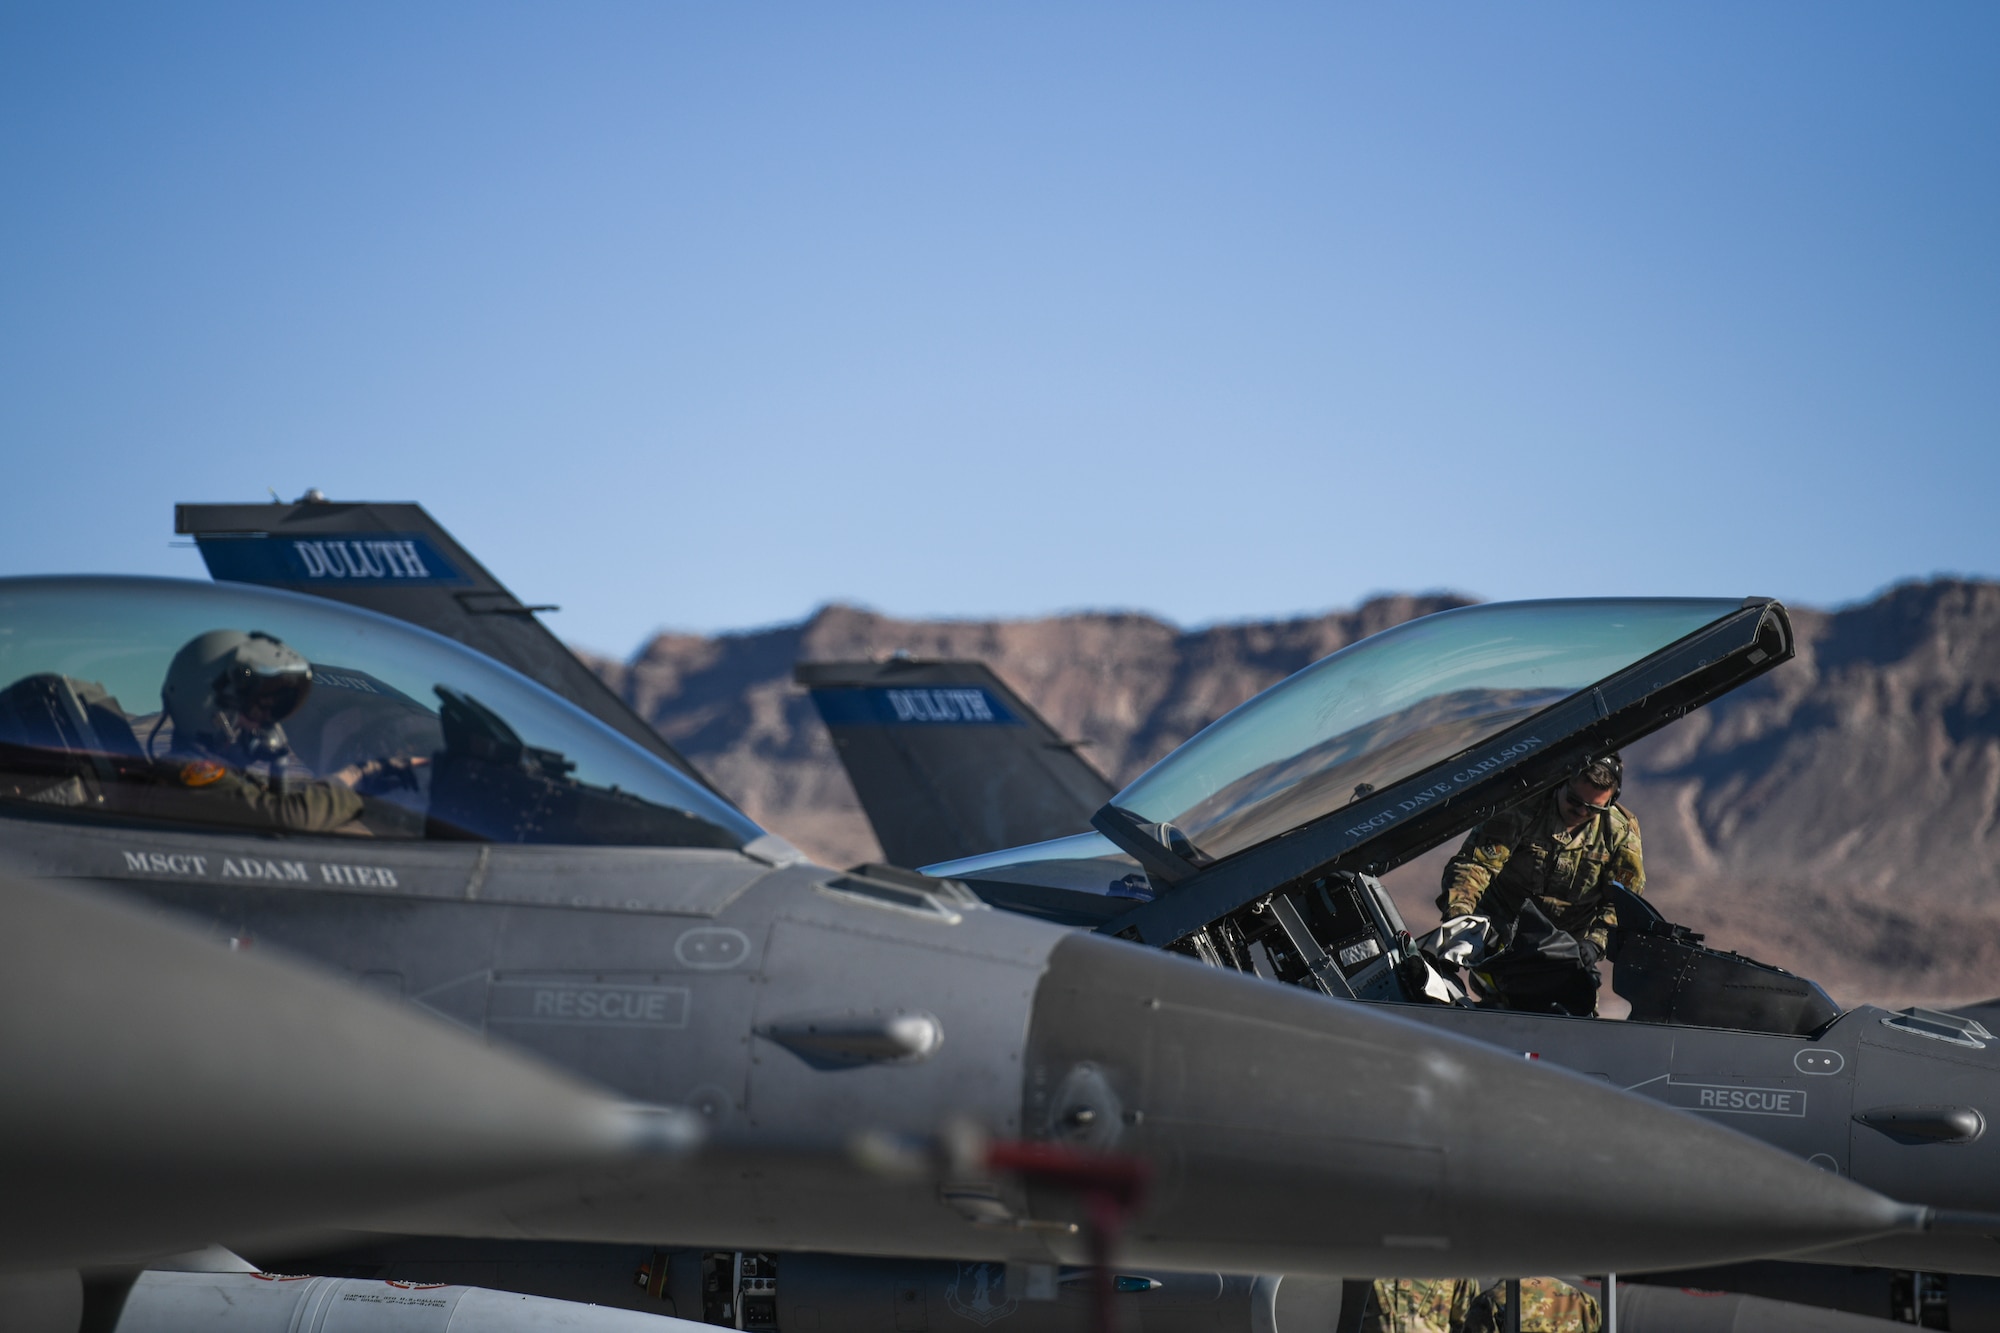 A U.S. Air Force F-16 Crew Chief assigned to the 148th Fighter Wing, Minnesota Air National Guard, Duluth, Minn., pulls the cockpit cover off prior to a flight at Nellis Air Force Base, Nev., Feb 8, 2022, while participating in Red Flag 22-1.